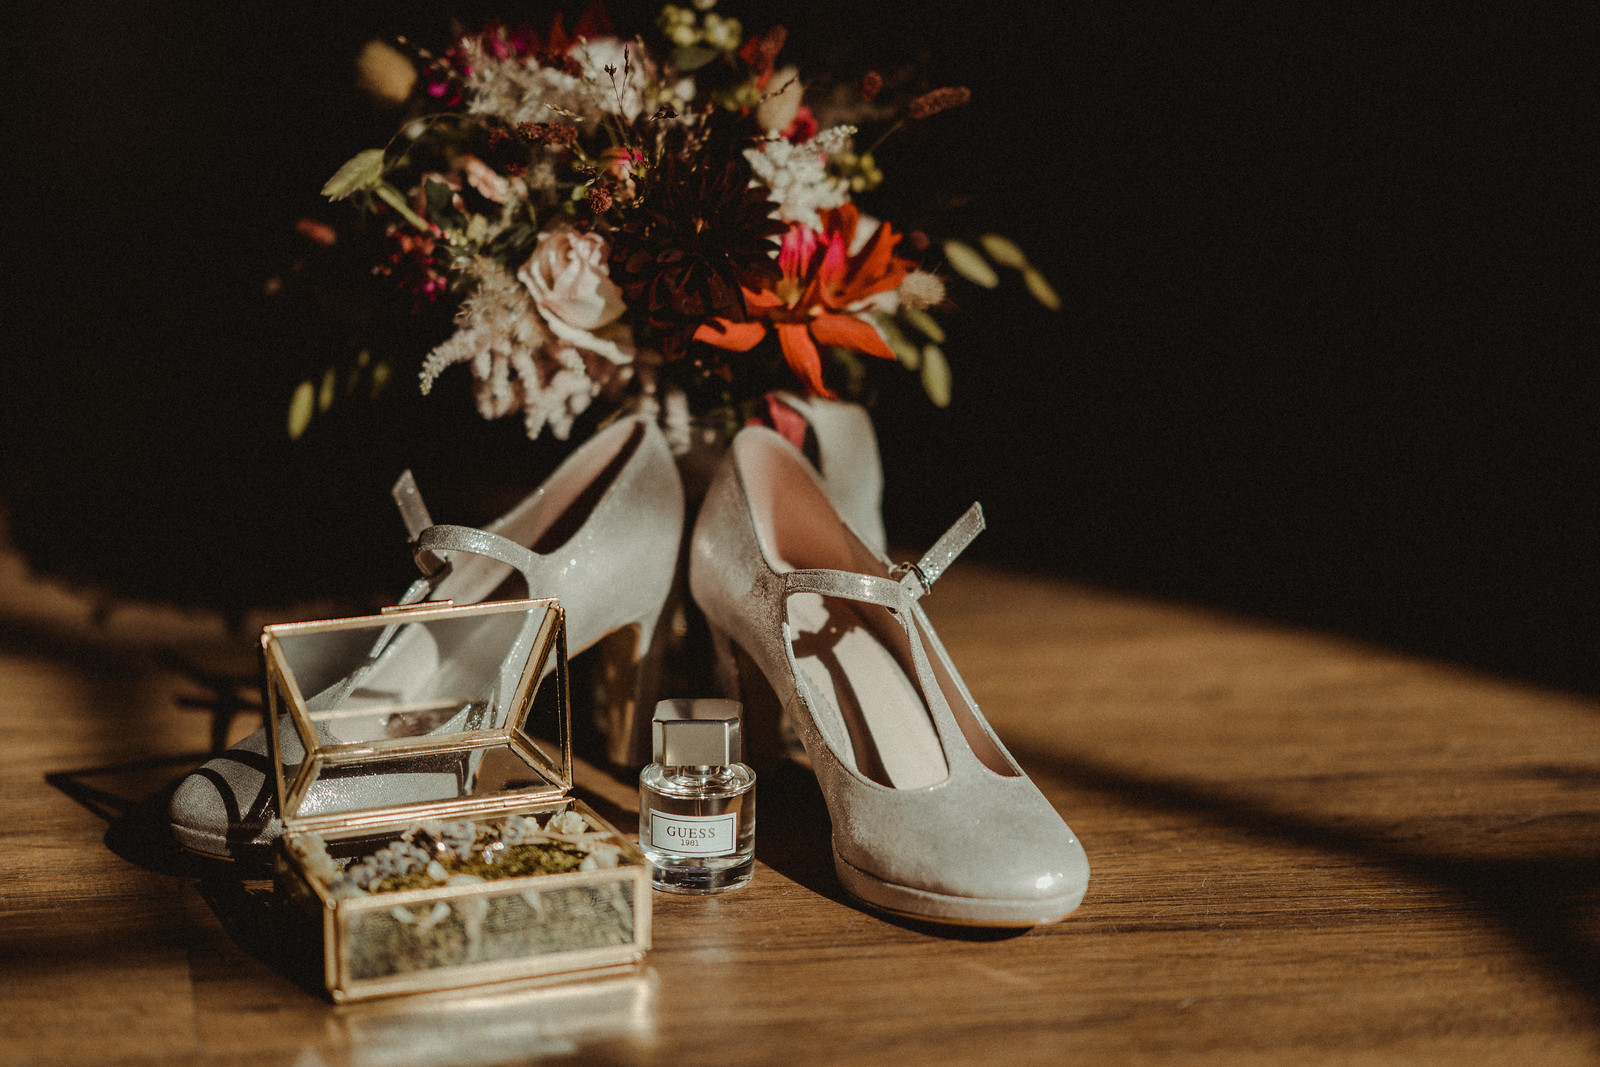 Brides wedding shoes and wedding flowers